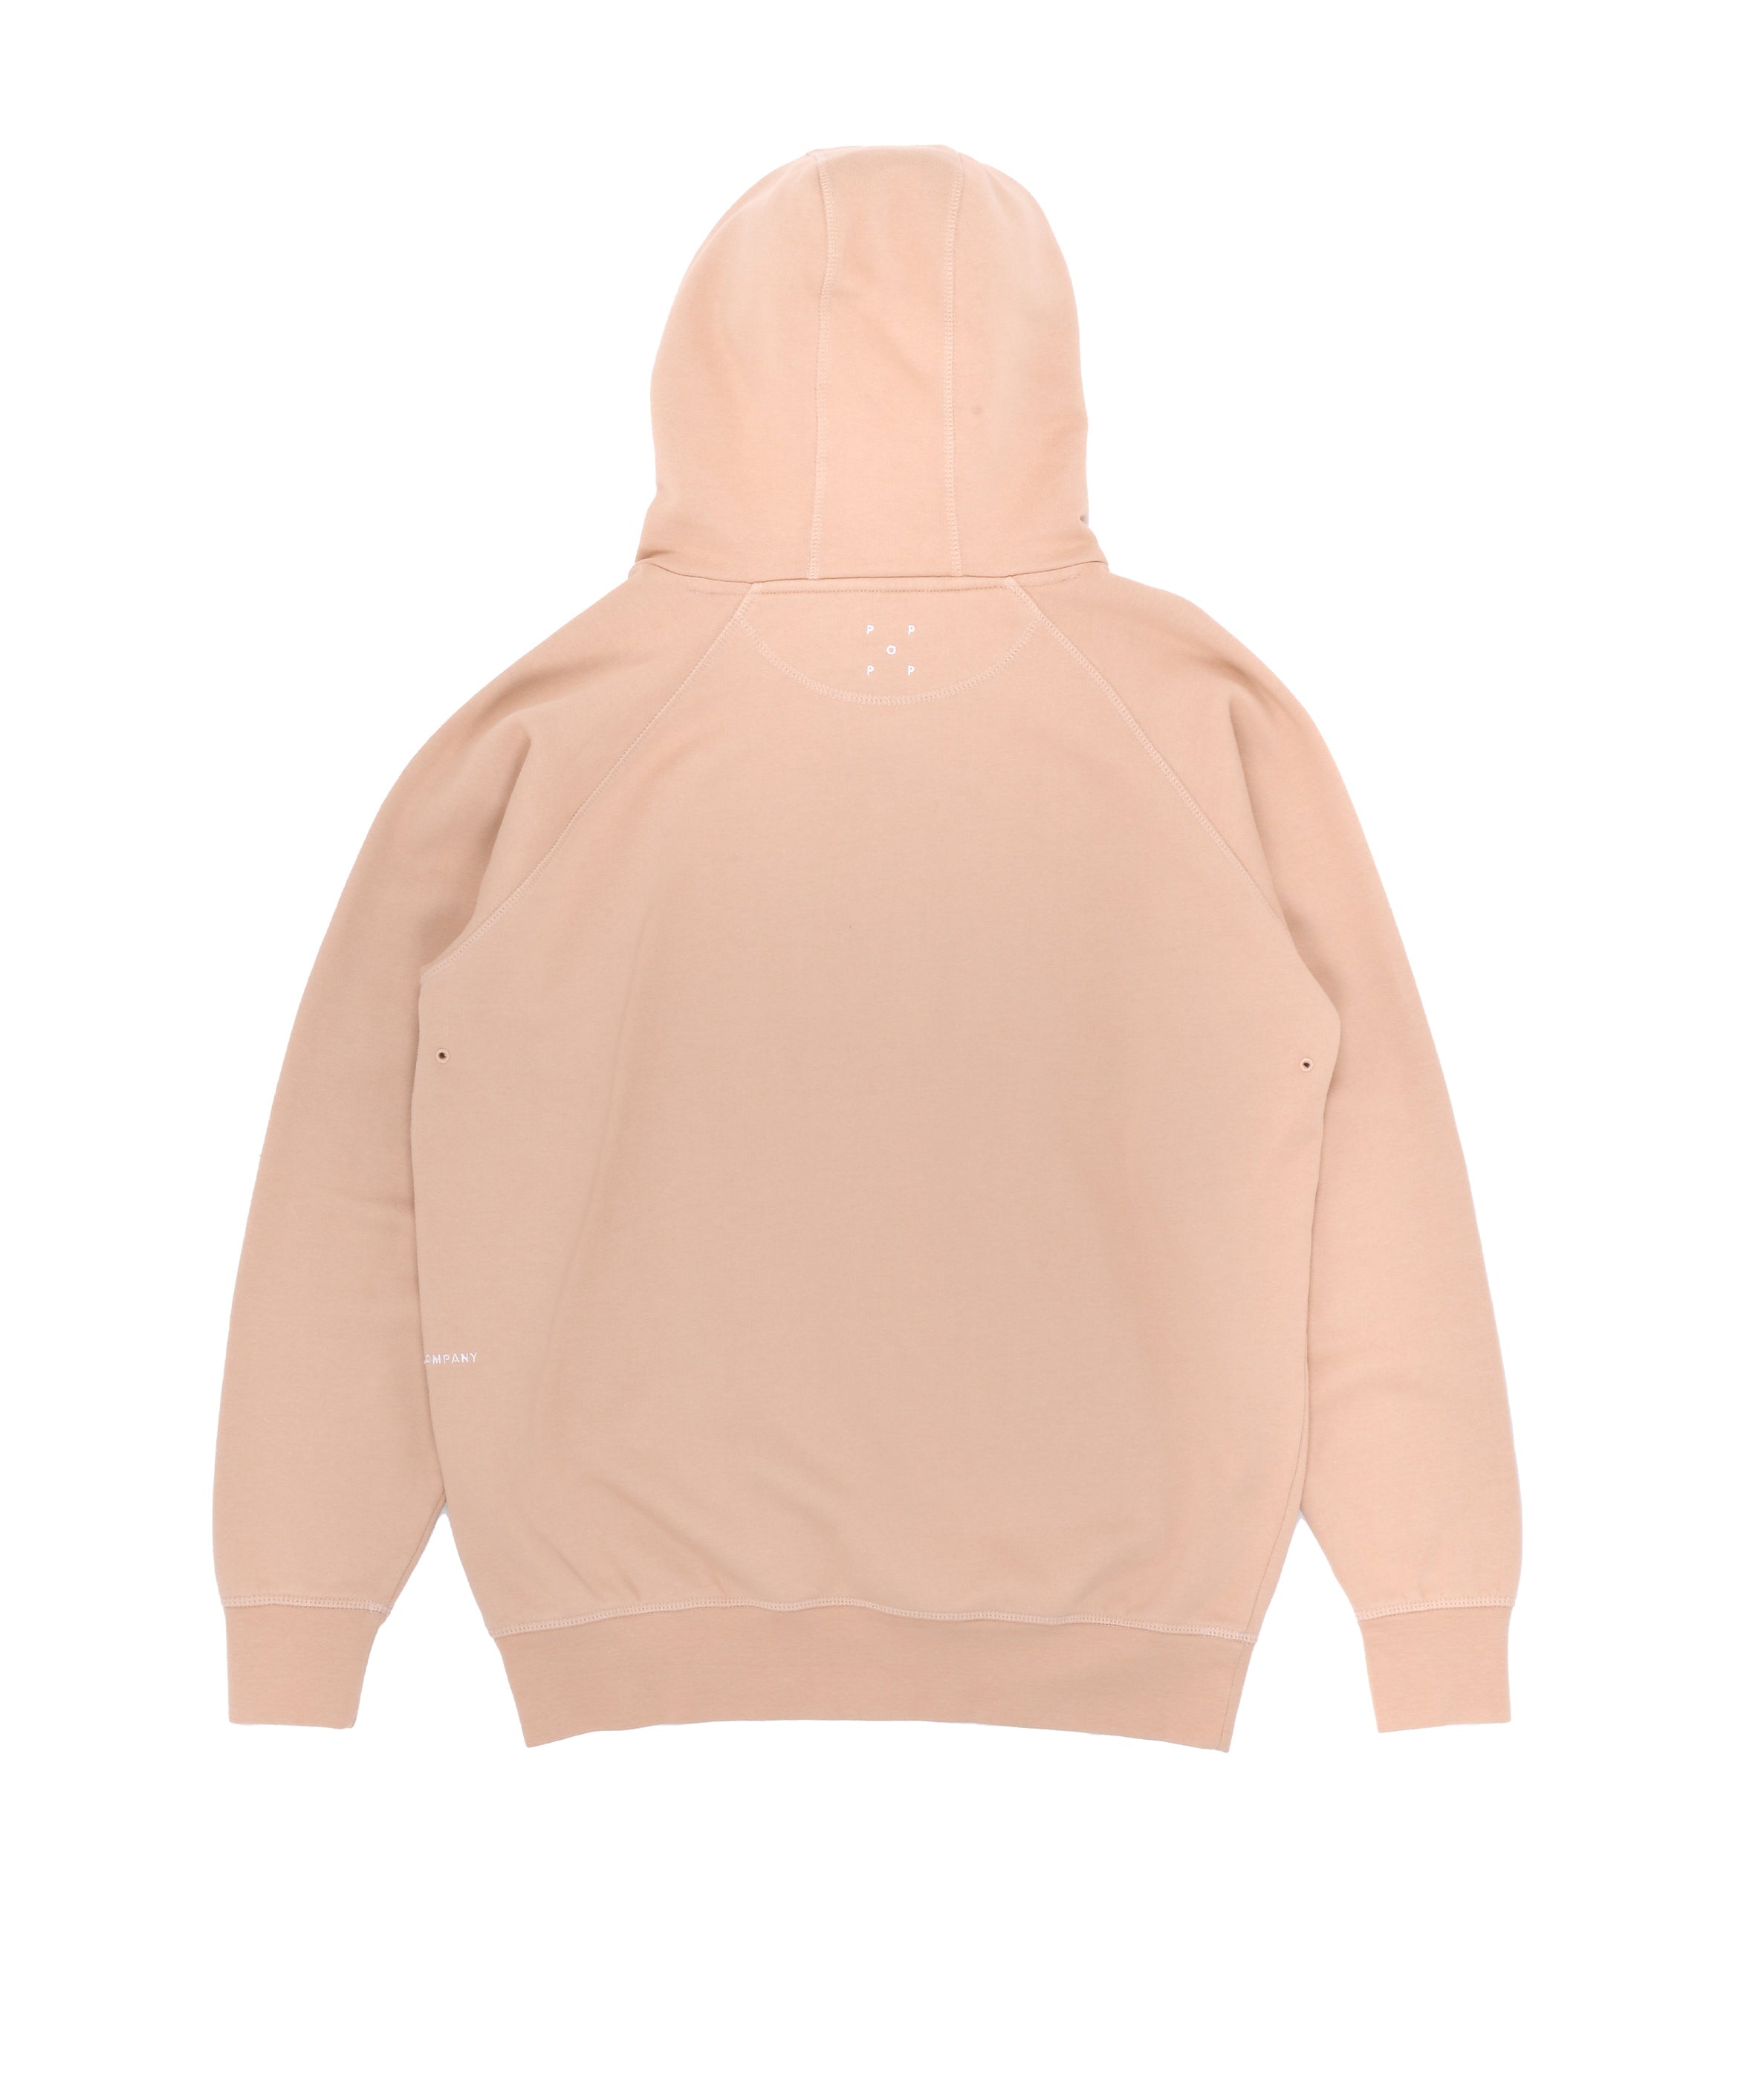 POP Trading Company Arch Hooded Sweater - Sesame POP Trading Company 